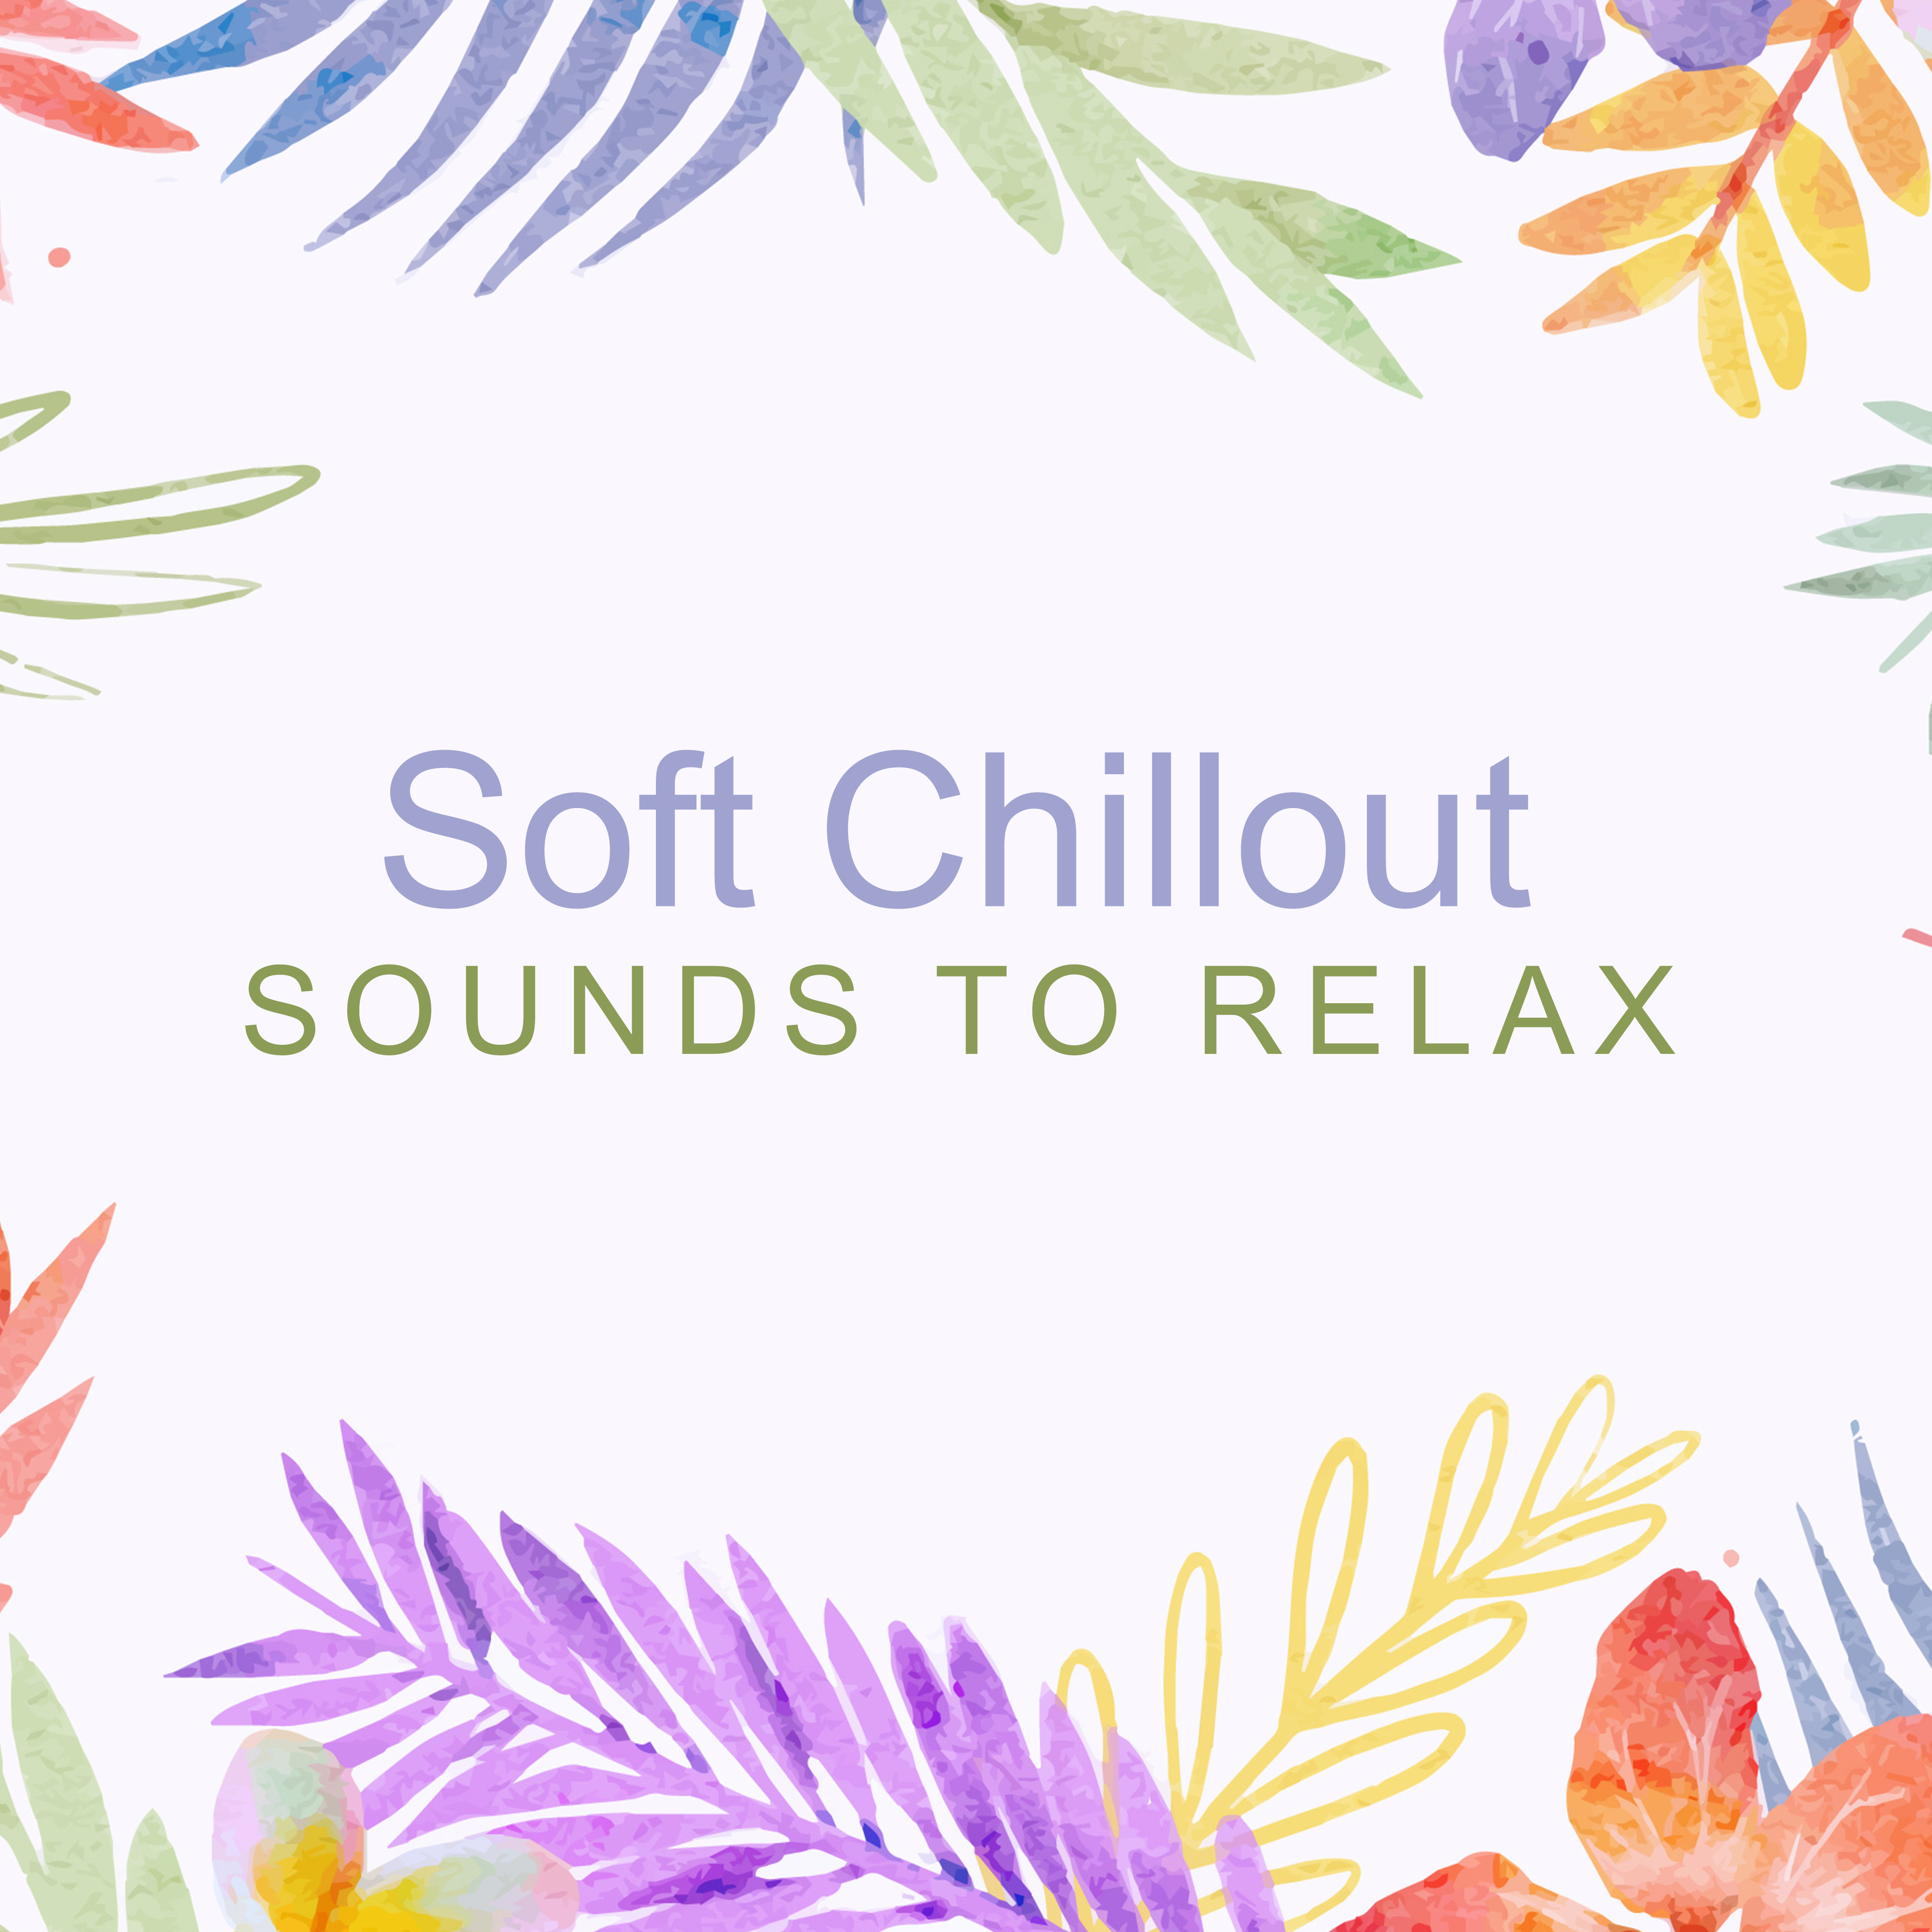 Soft Chillout Sounds to Relax